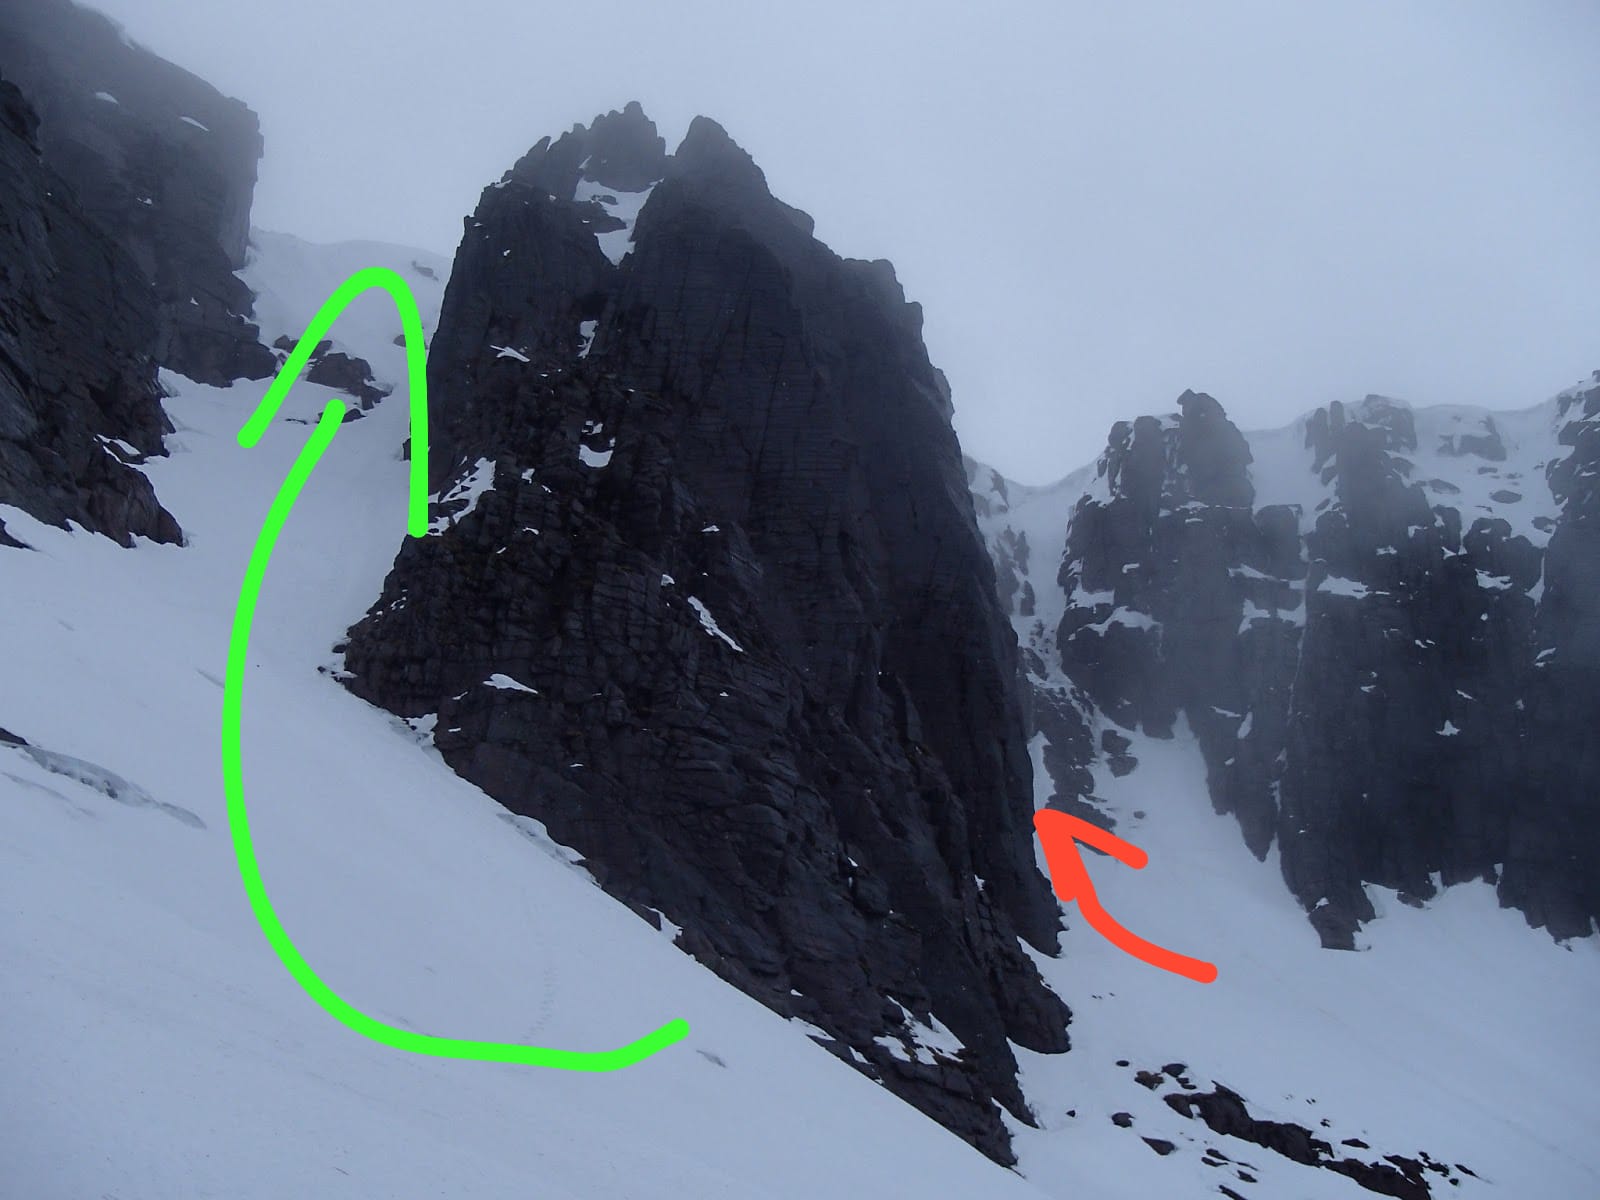 2. Subsequent shot indicating our error from a different angle (image taken from another source/day) - Green arrow the route we should have taken; Red the route we did take.